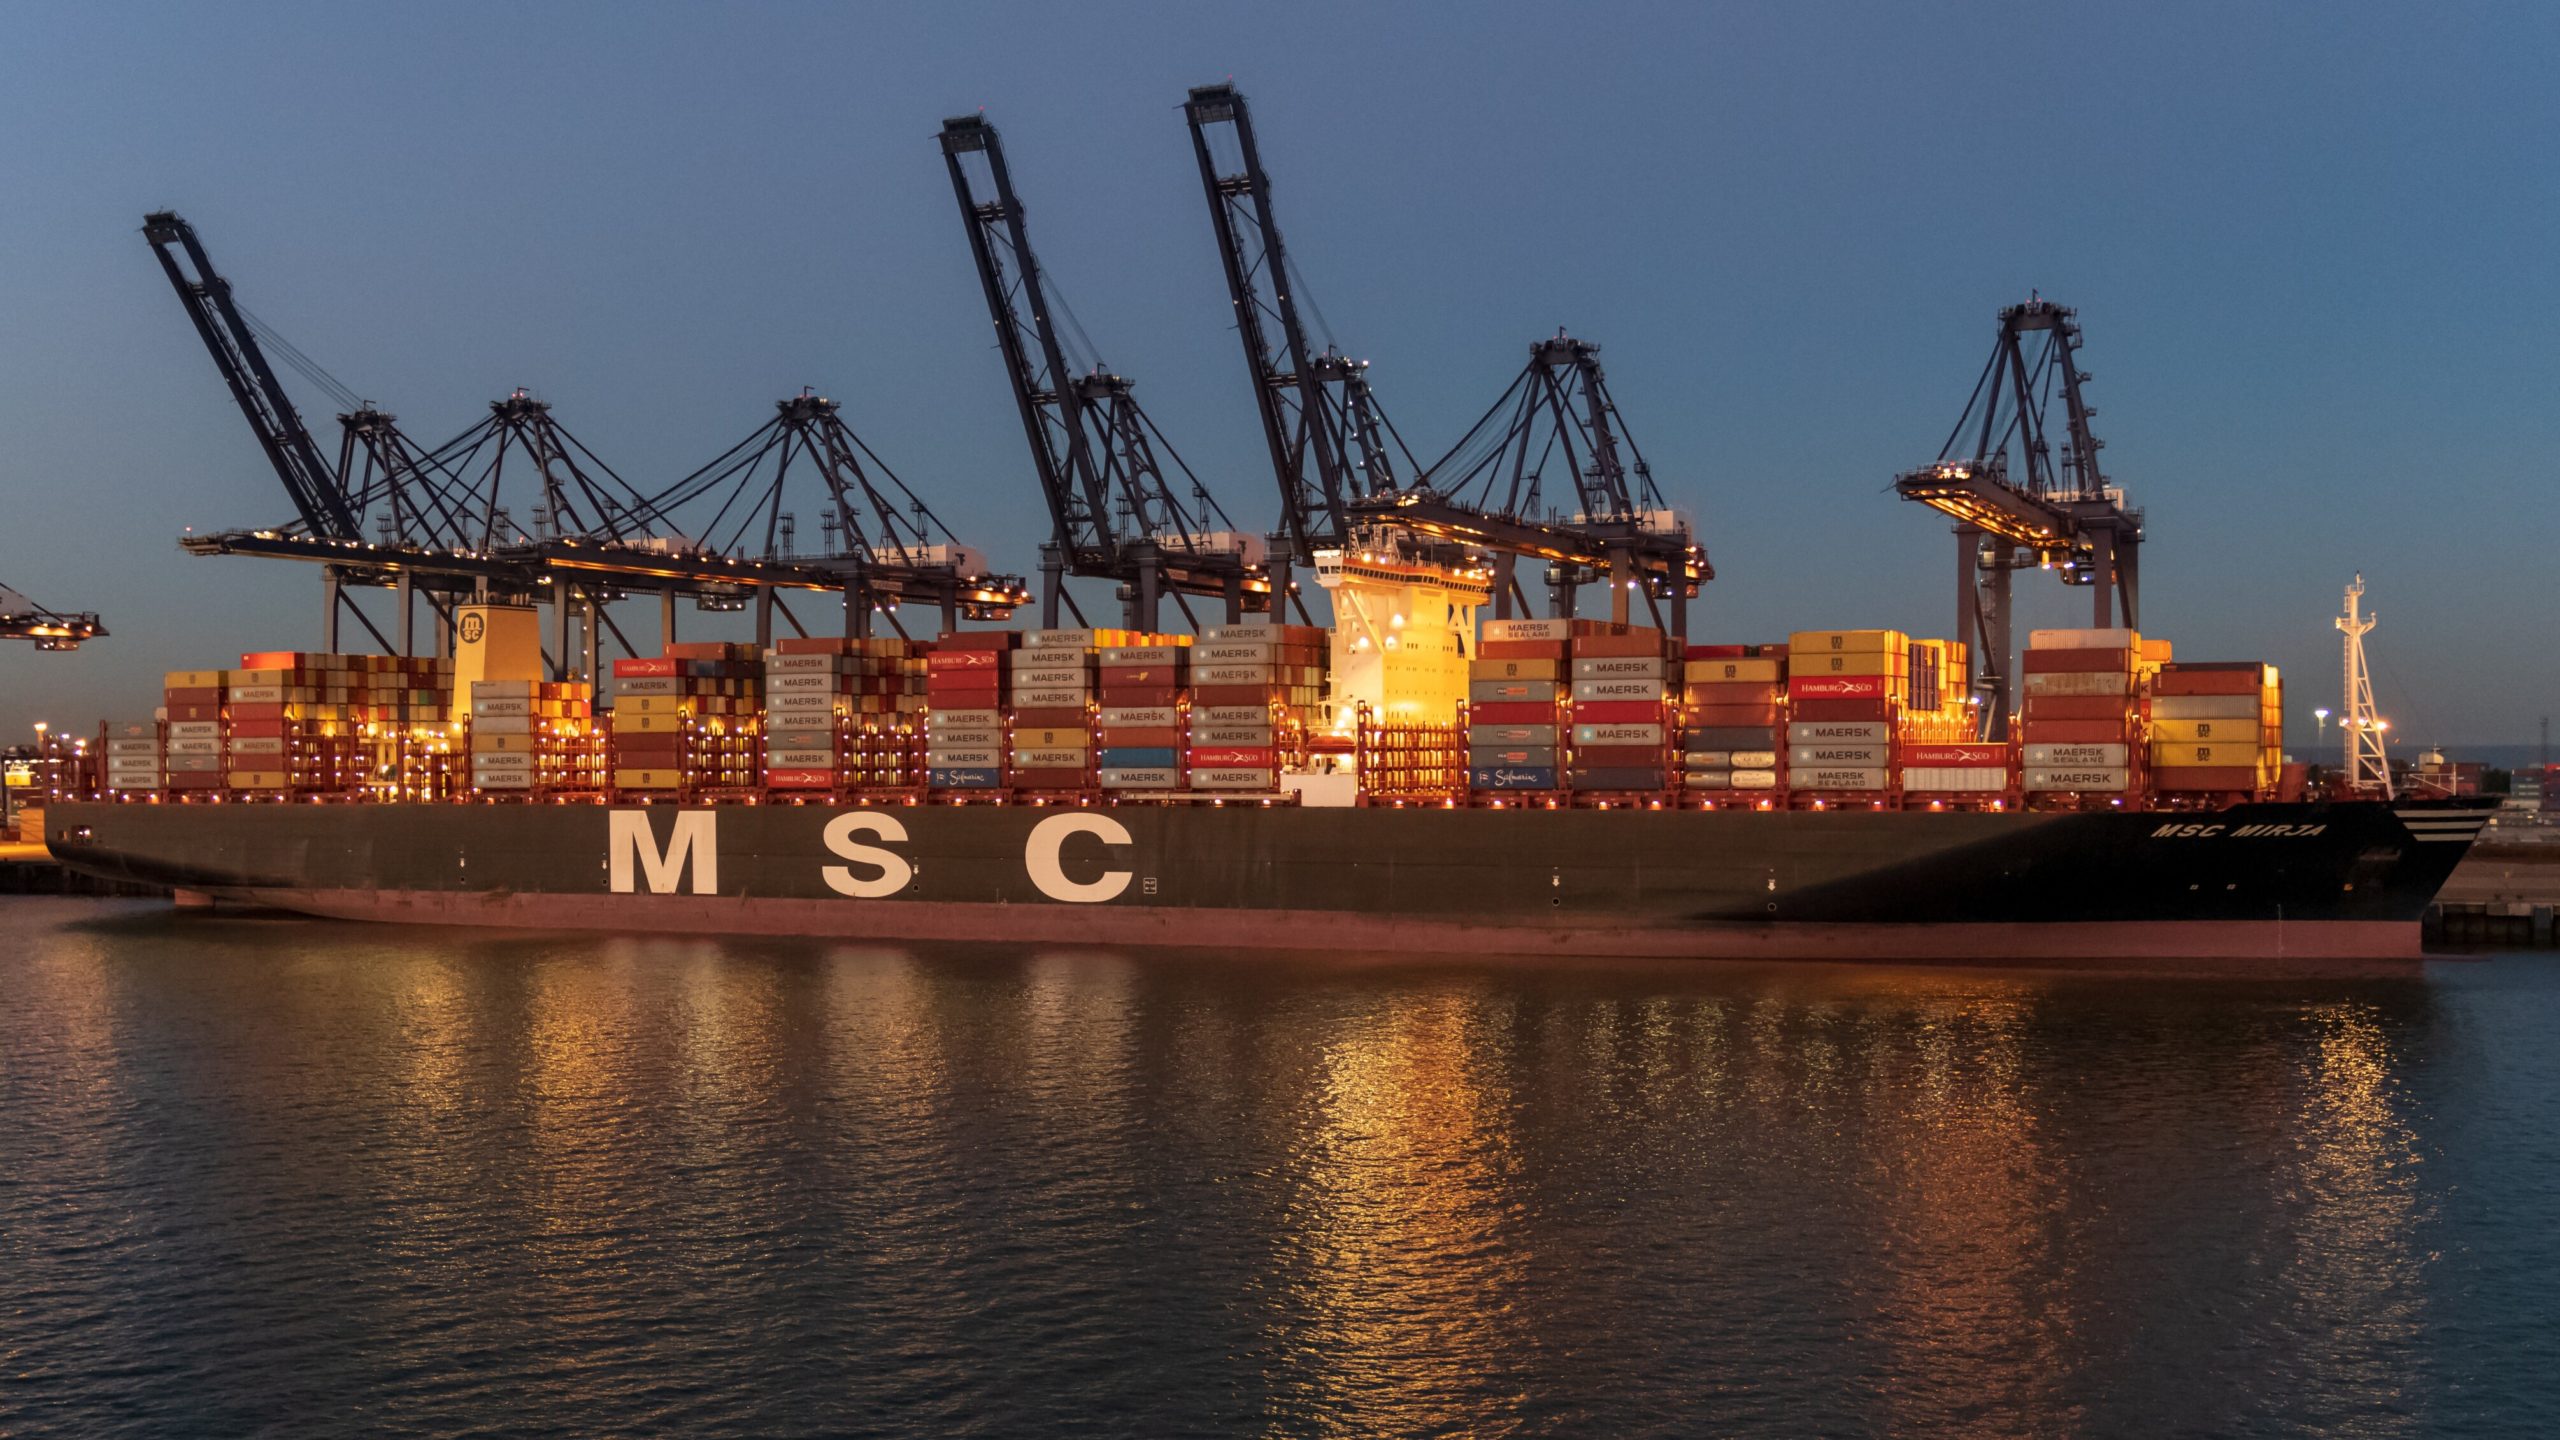 T&E: ‘MSC shipping company ranks among Europe’s top CO2 polluters’